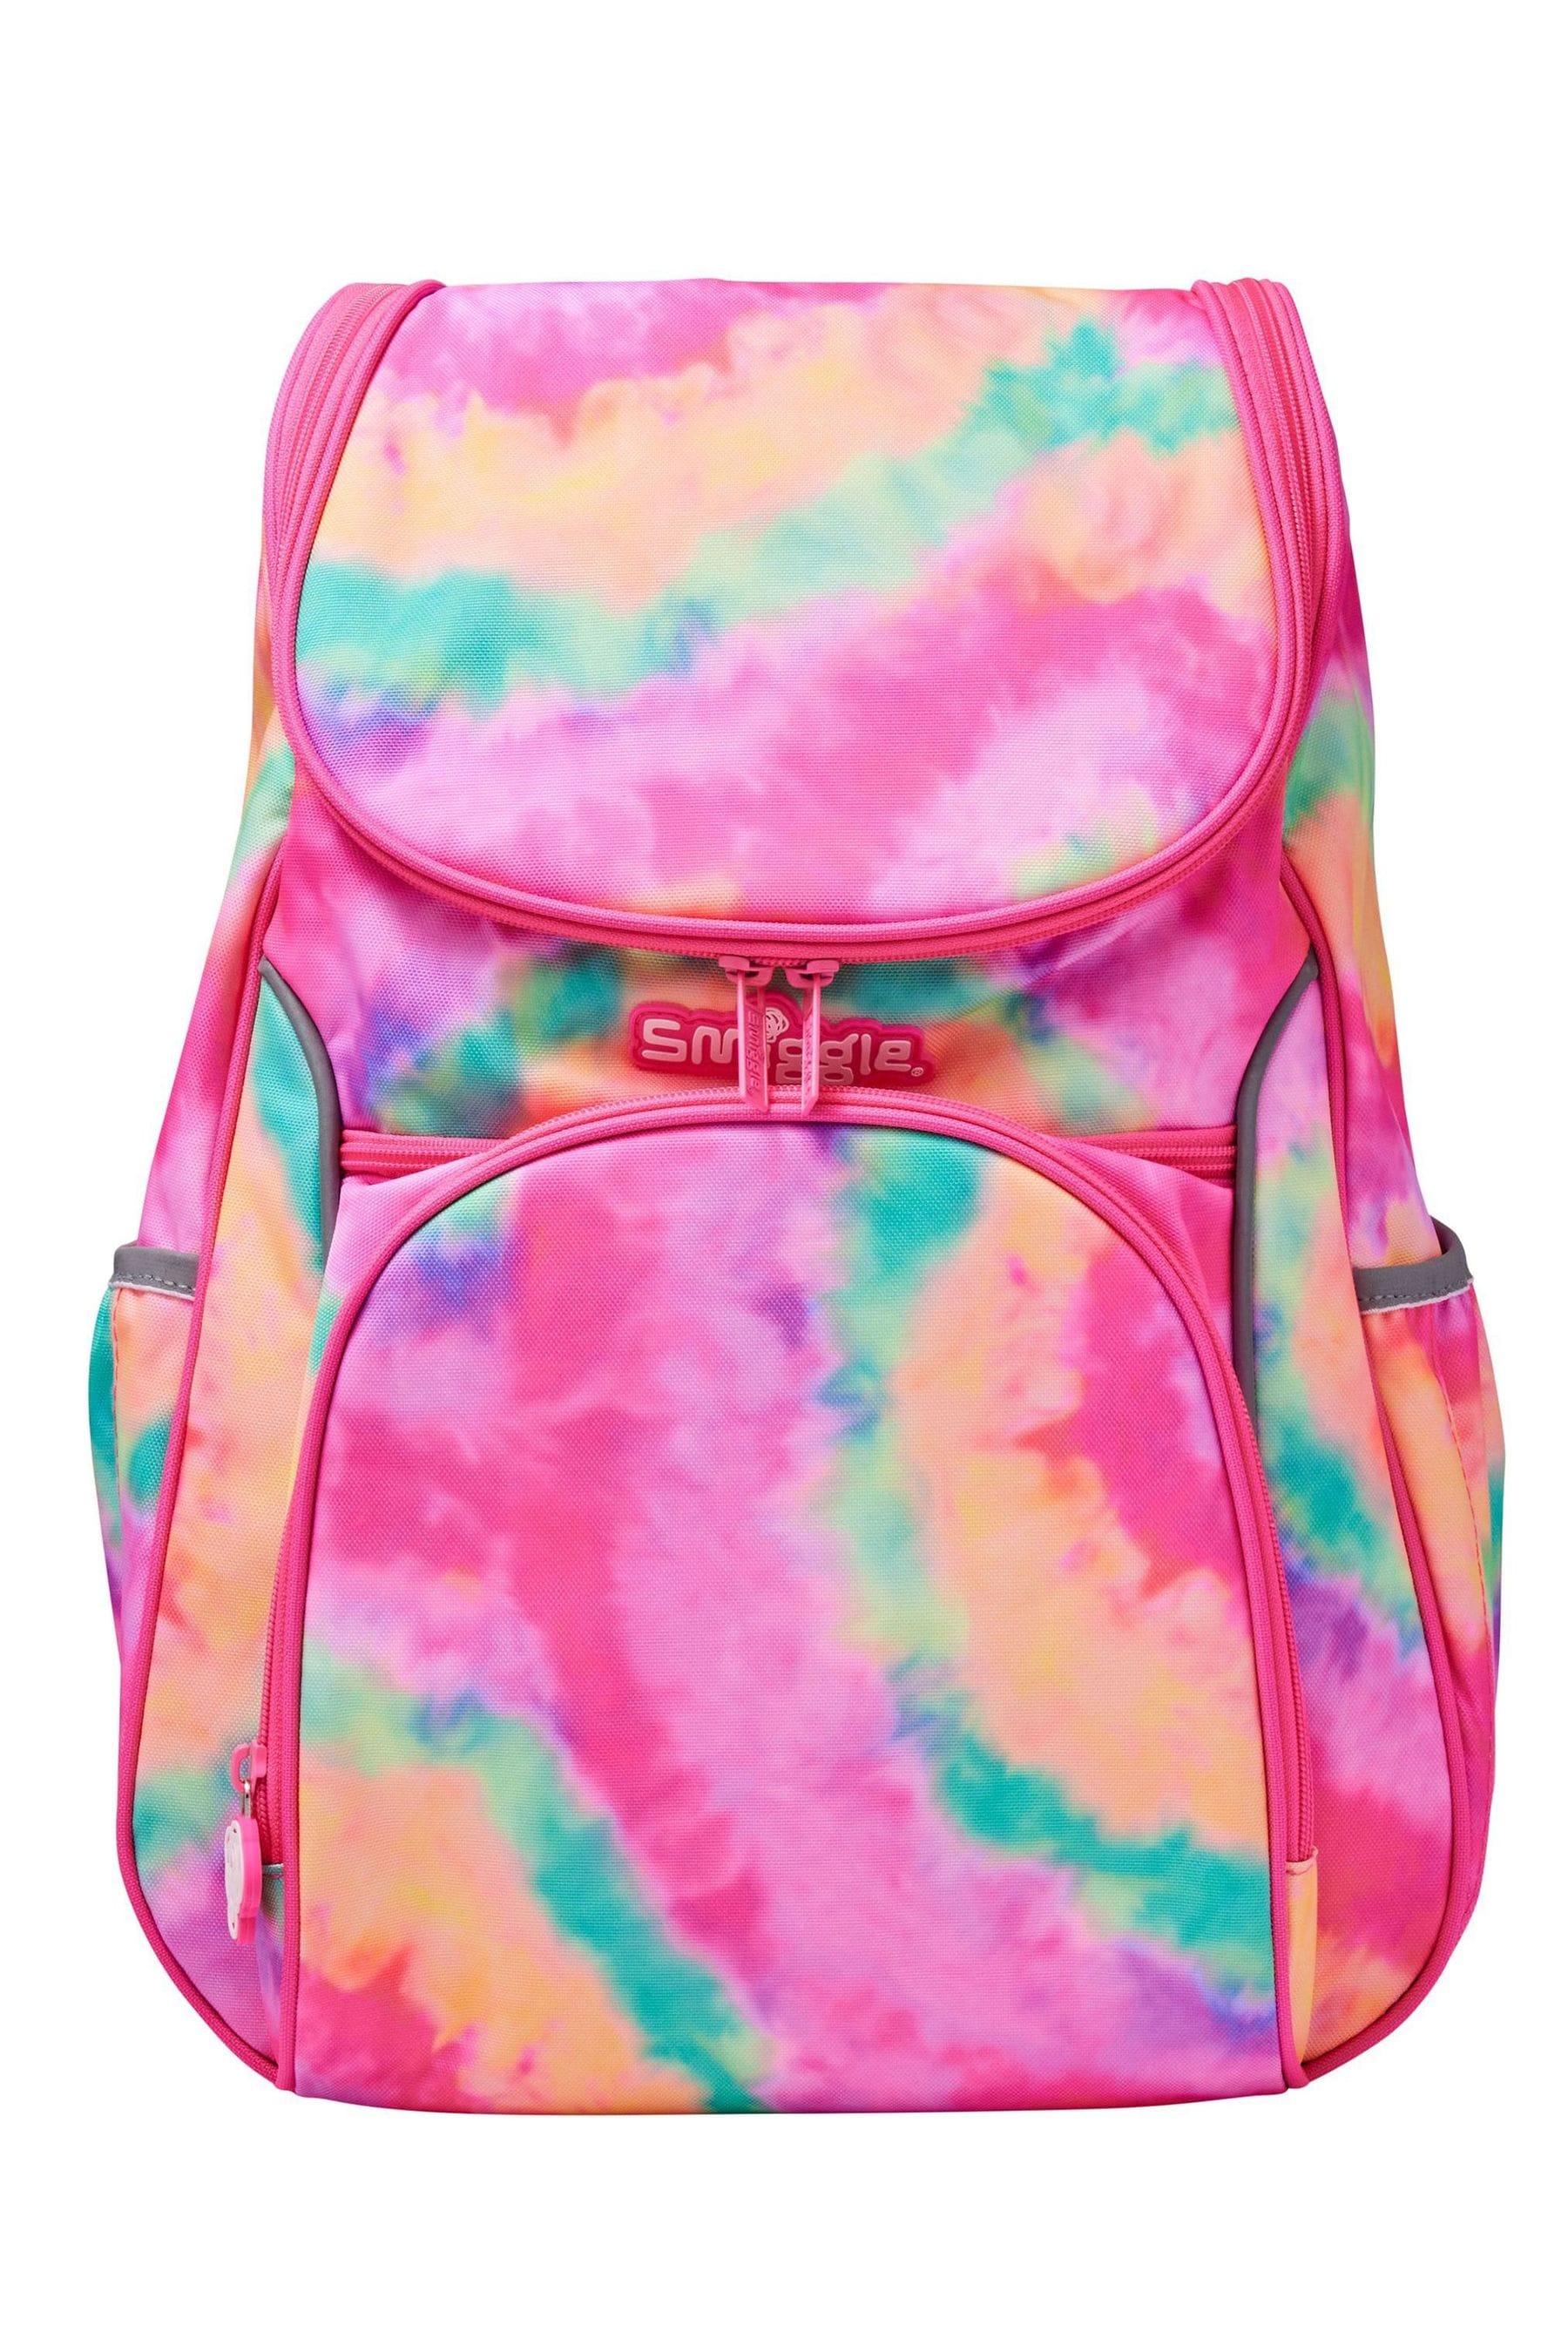 Smiggle Pink Vivid Access Backpack with Reflective Tape